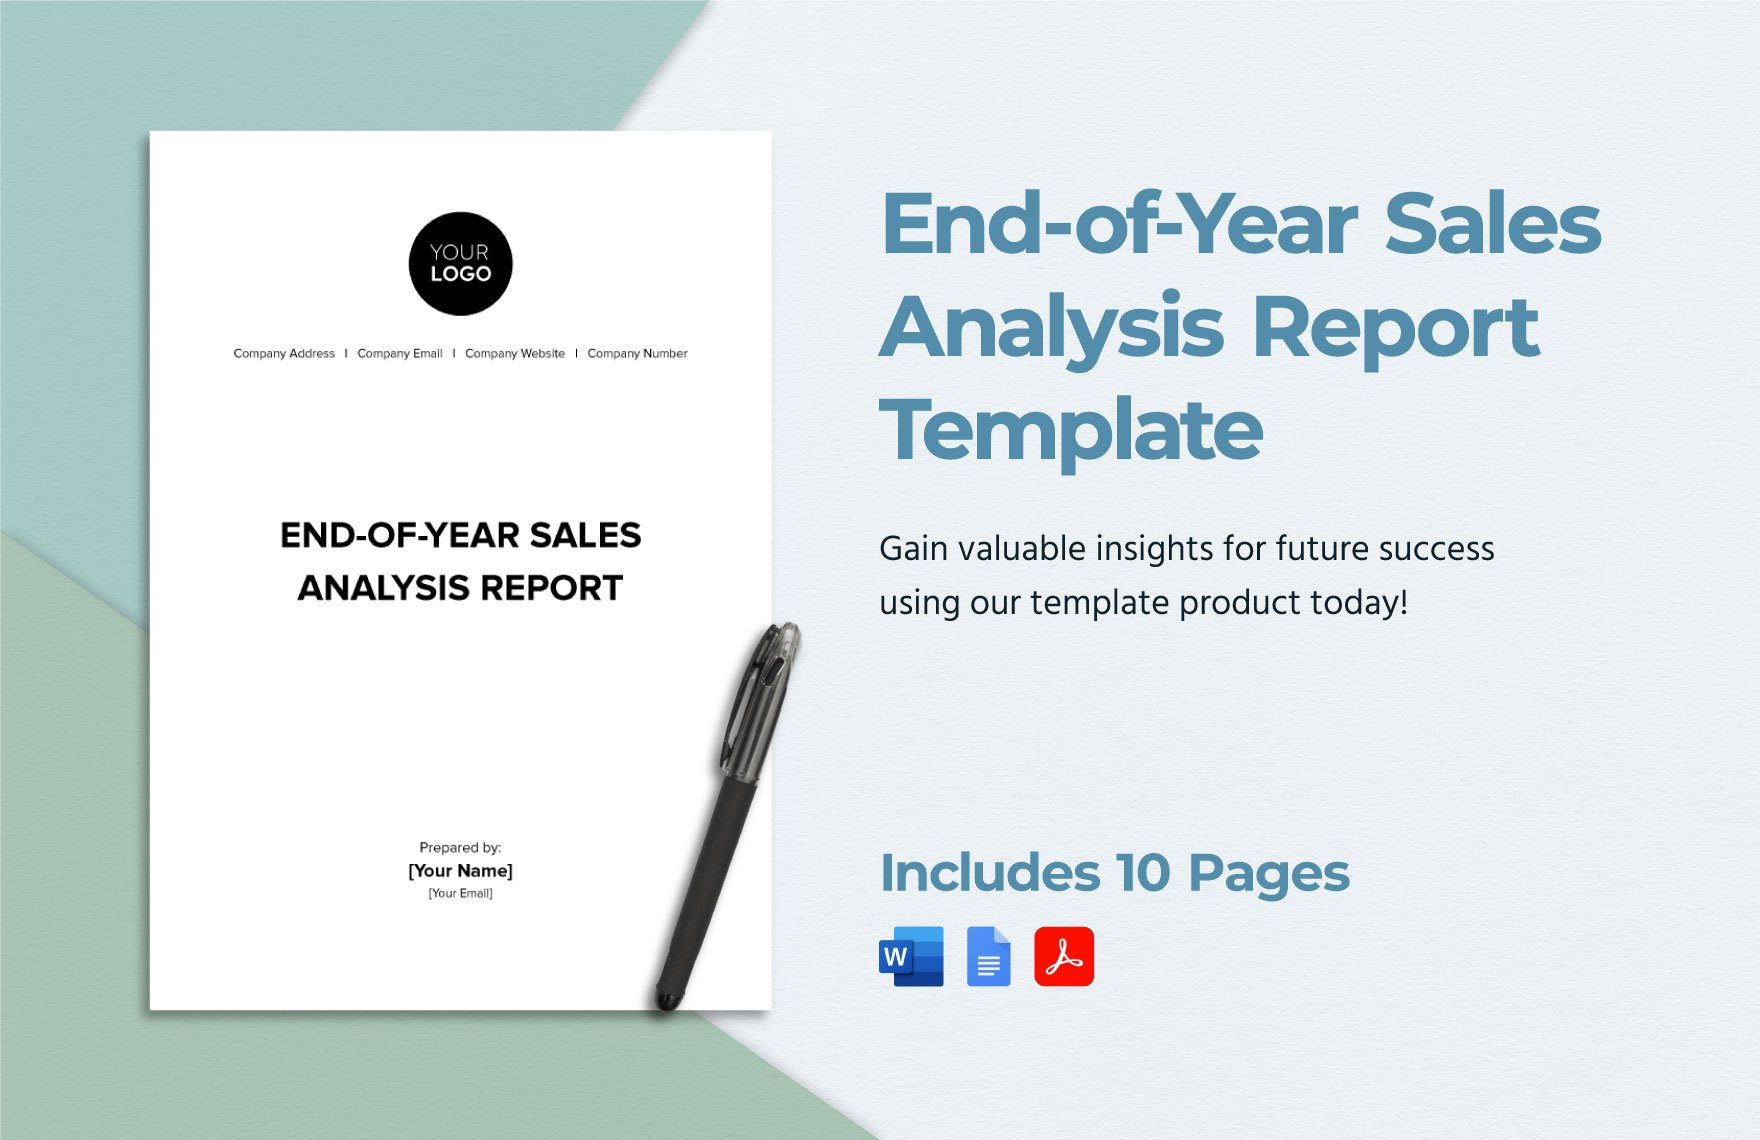 End-of-Year Sales Analysis Report Template